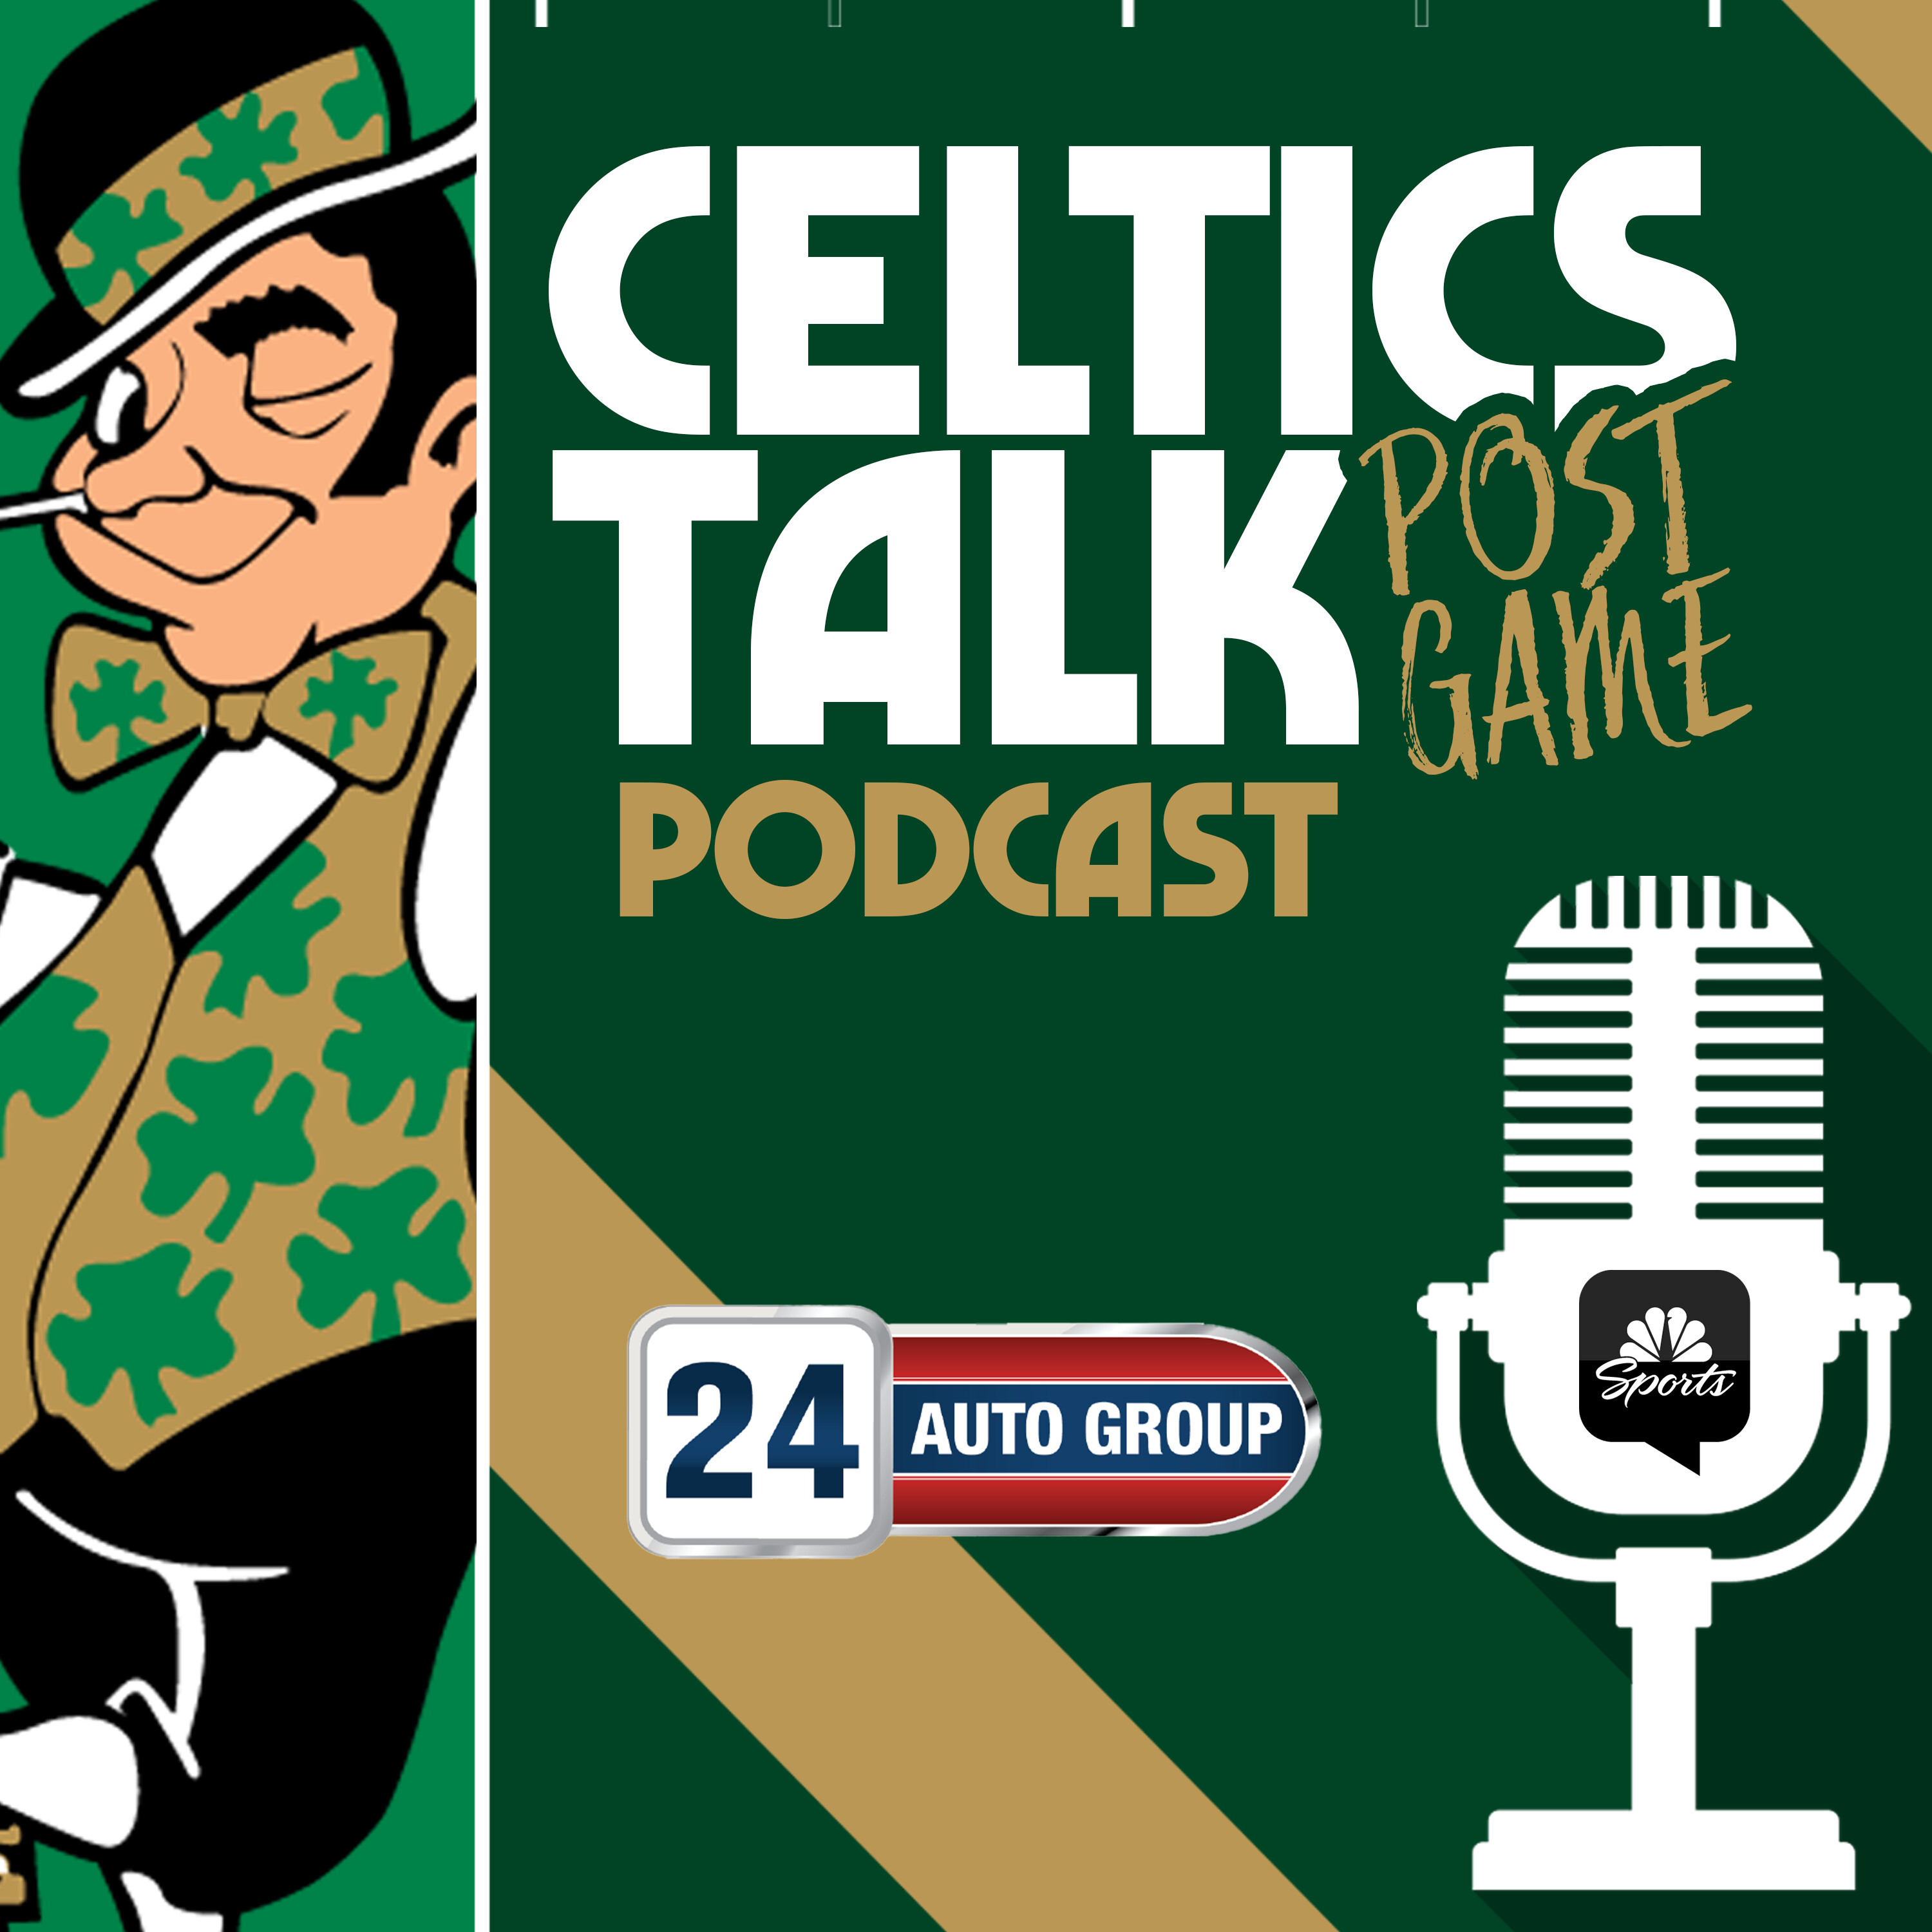 POSTGAME POD: Missed shots late cost Celtics in OT loss to Knicks